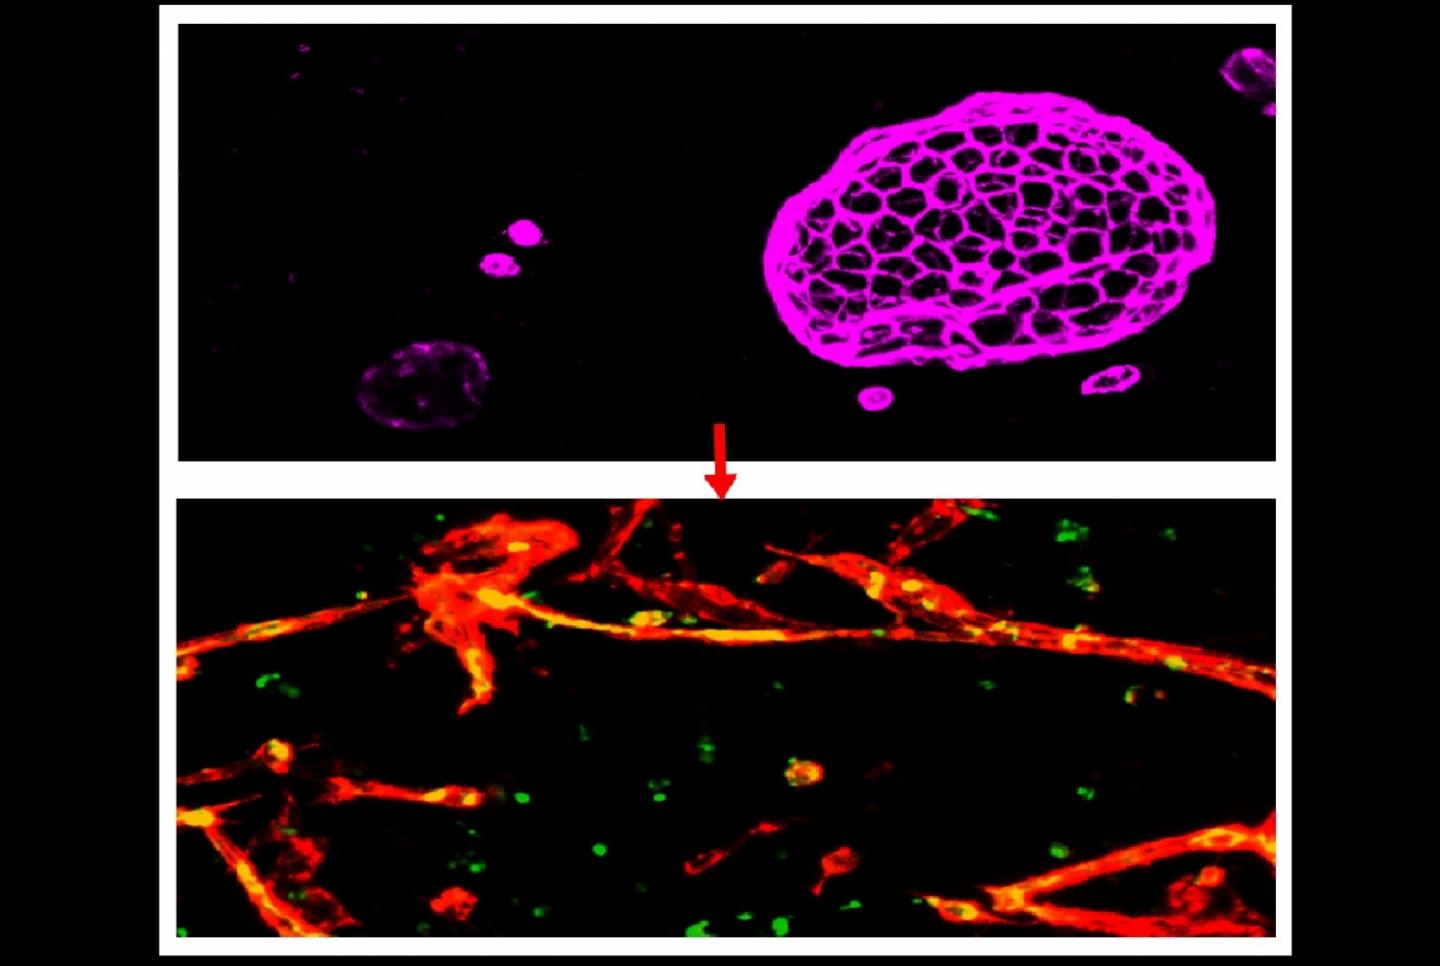 Induced brain microvascular endothelial cells